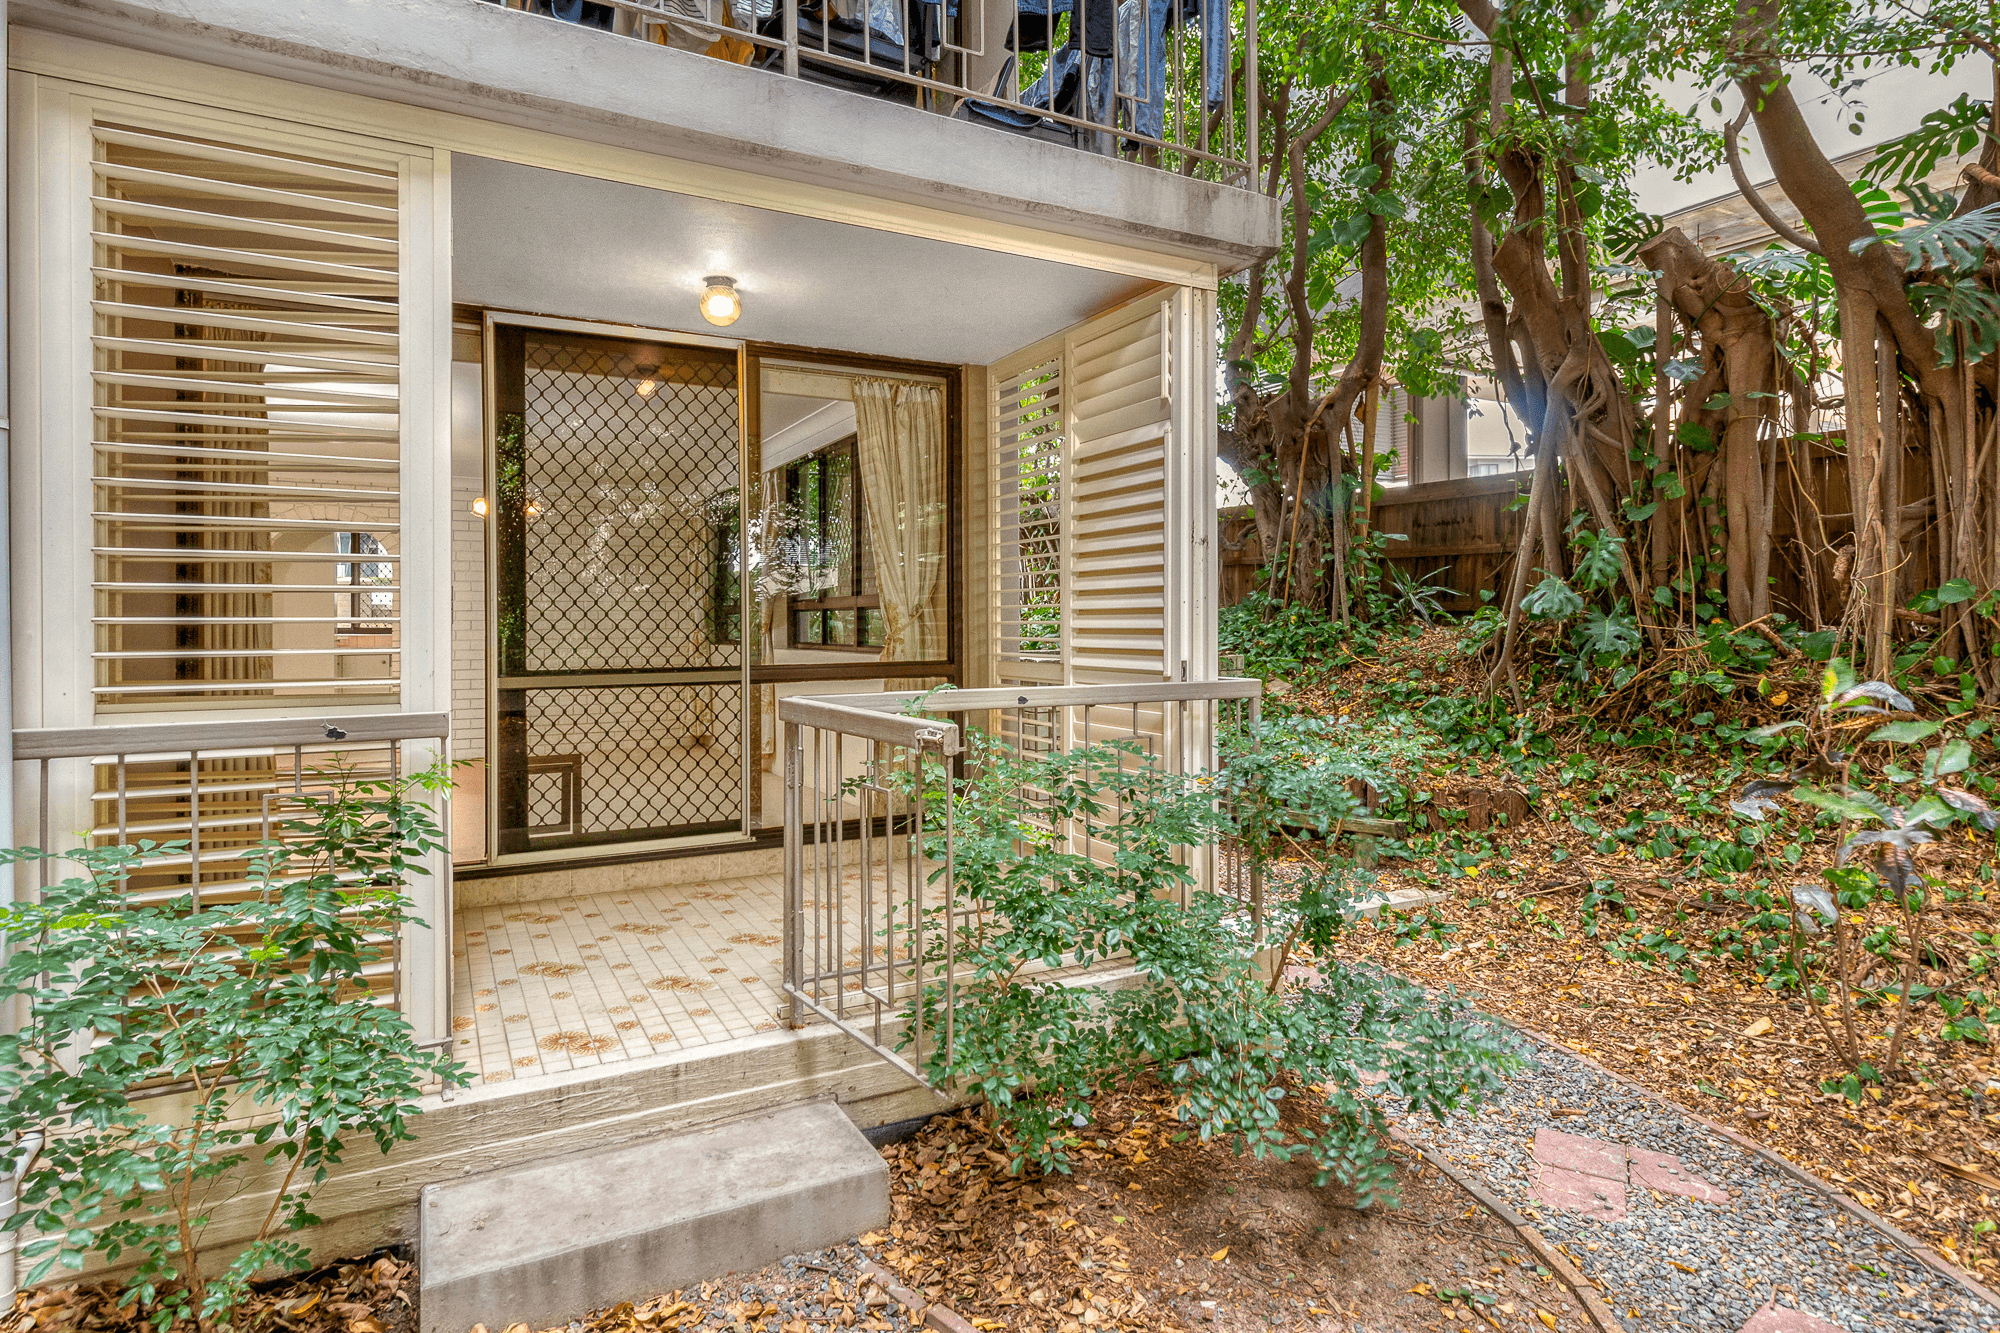 2/83 O'Connell St, Kangaroo Point, QLD 4169